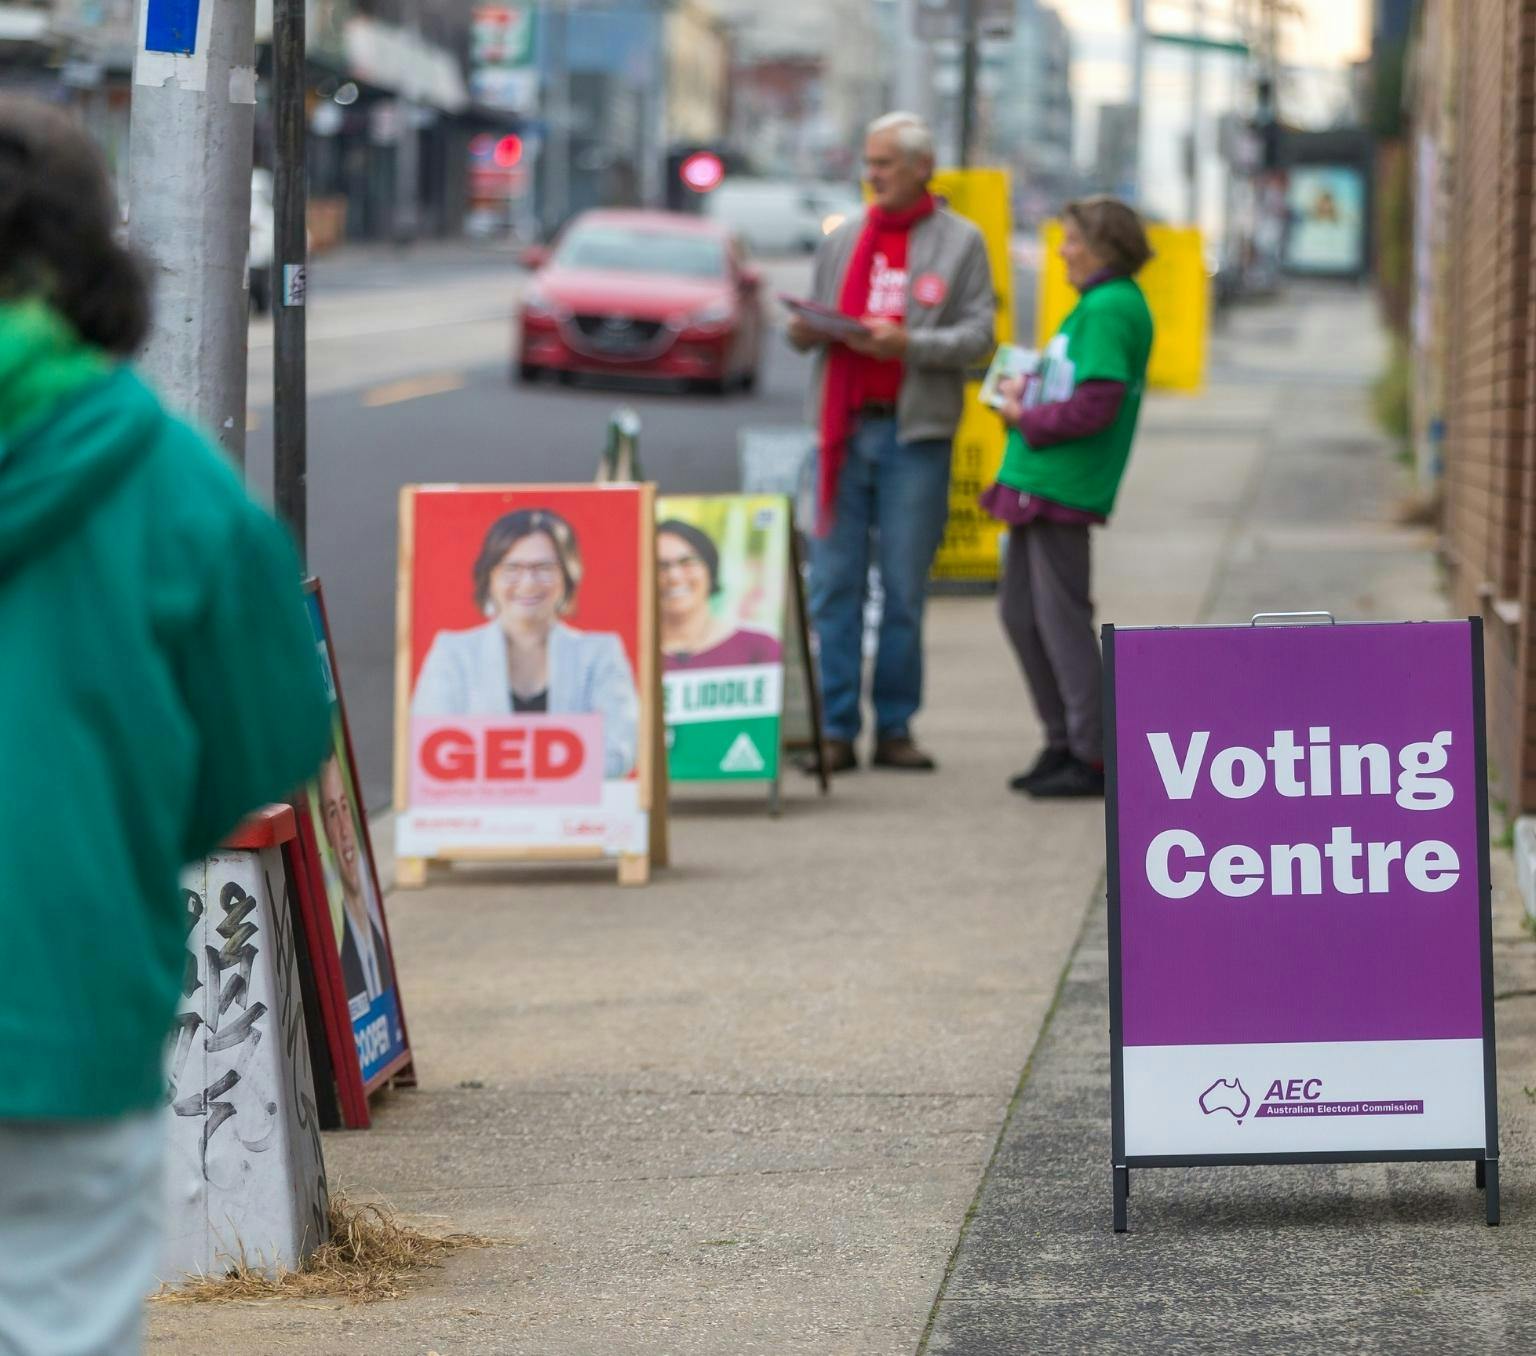 A-frame election posters on the footpath outside a polling booth. A purple sign says 'voting centre'.